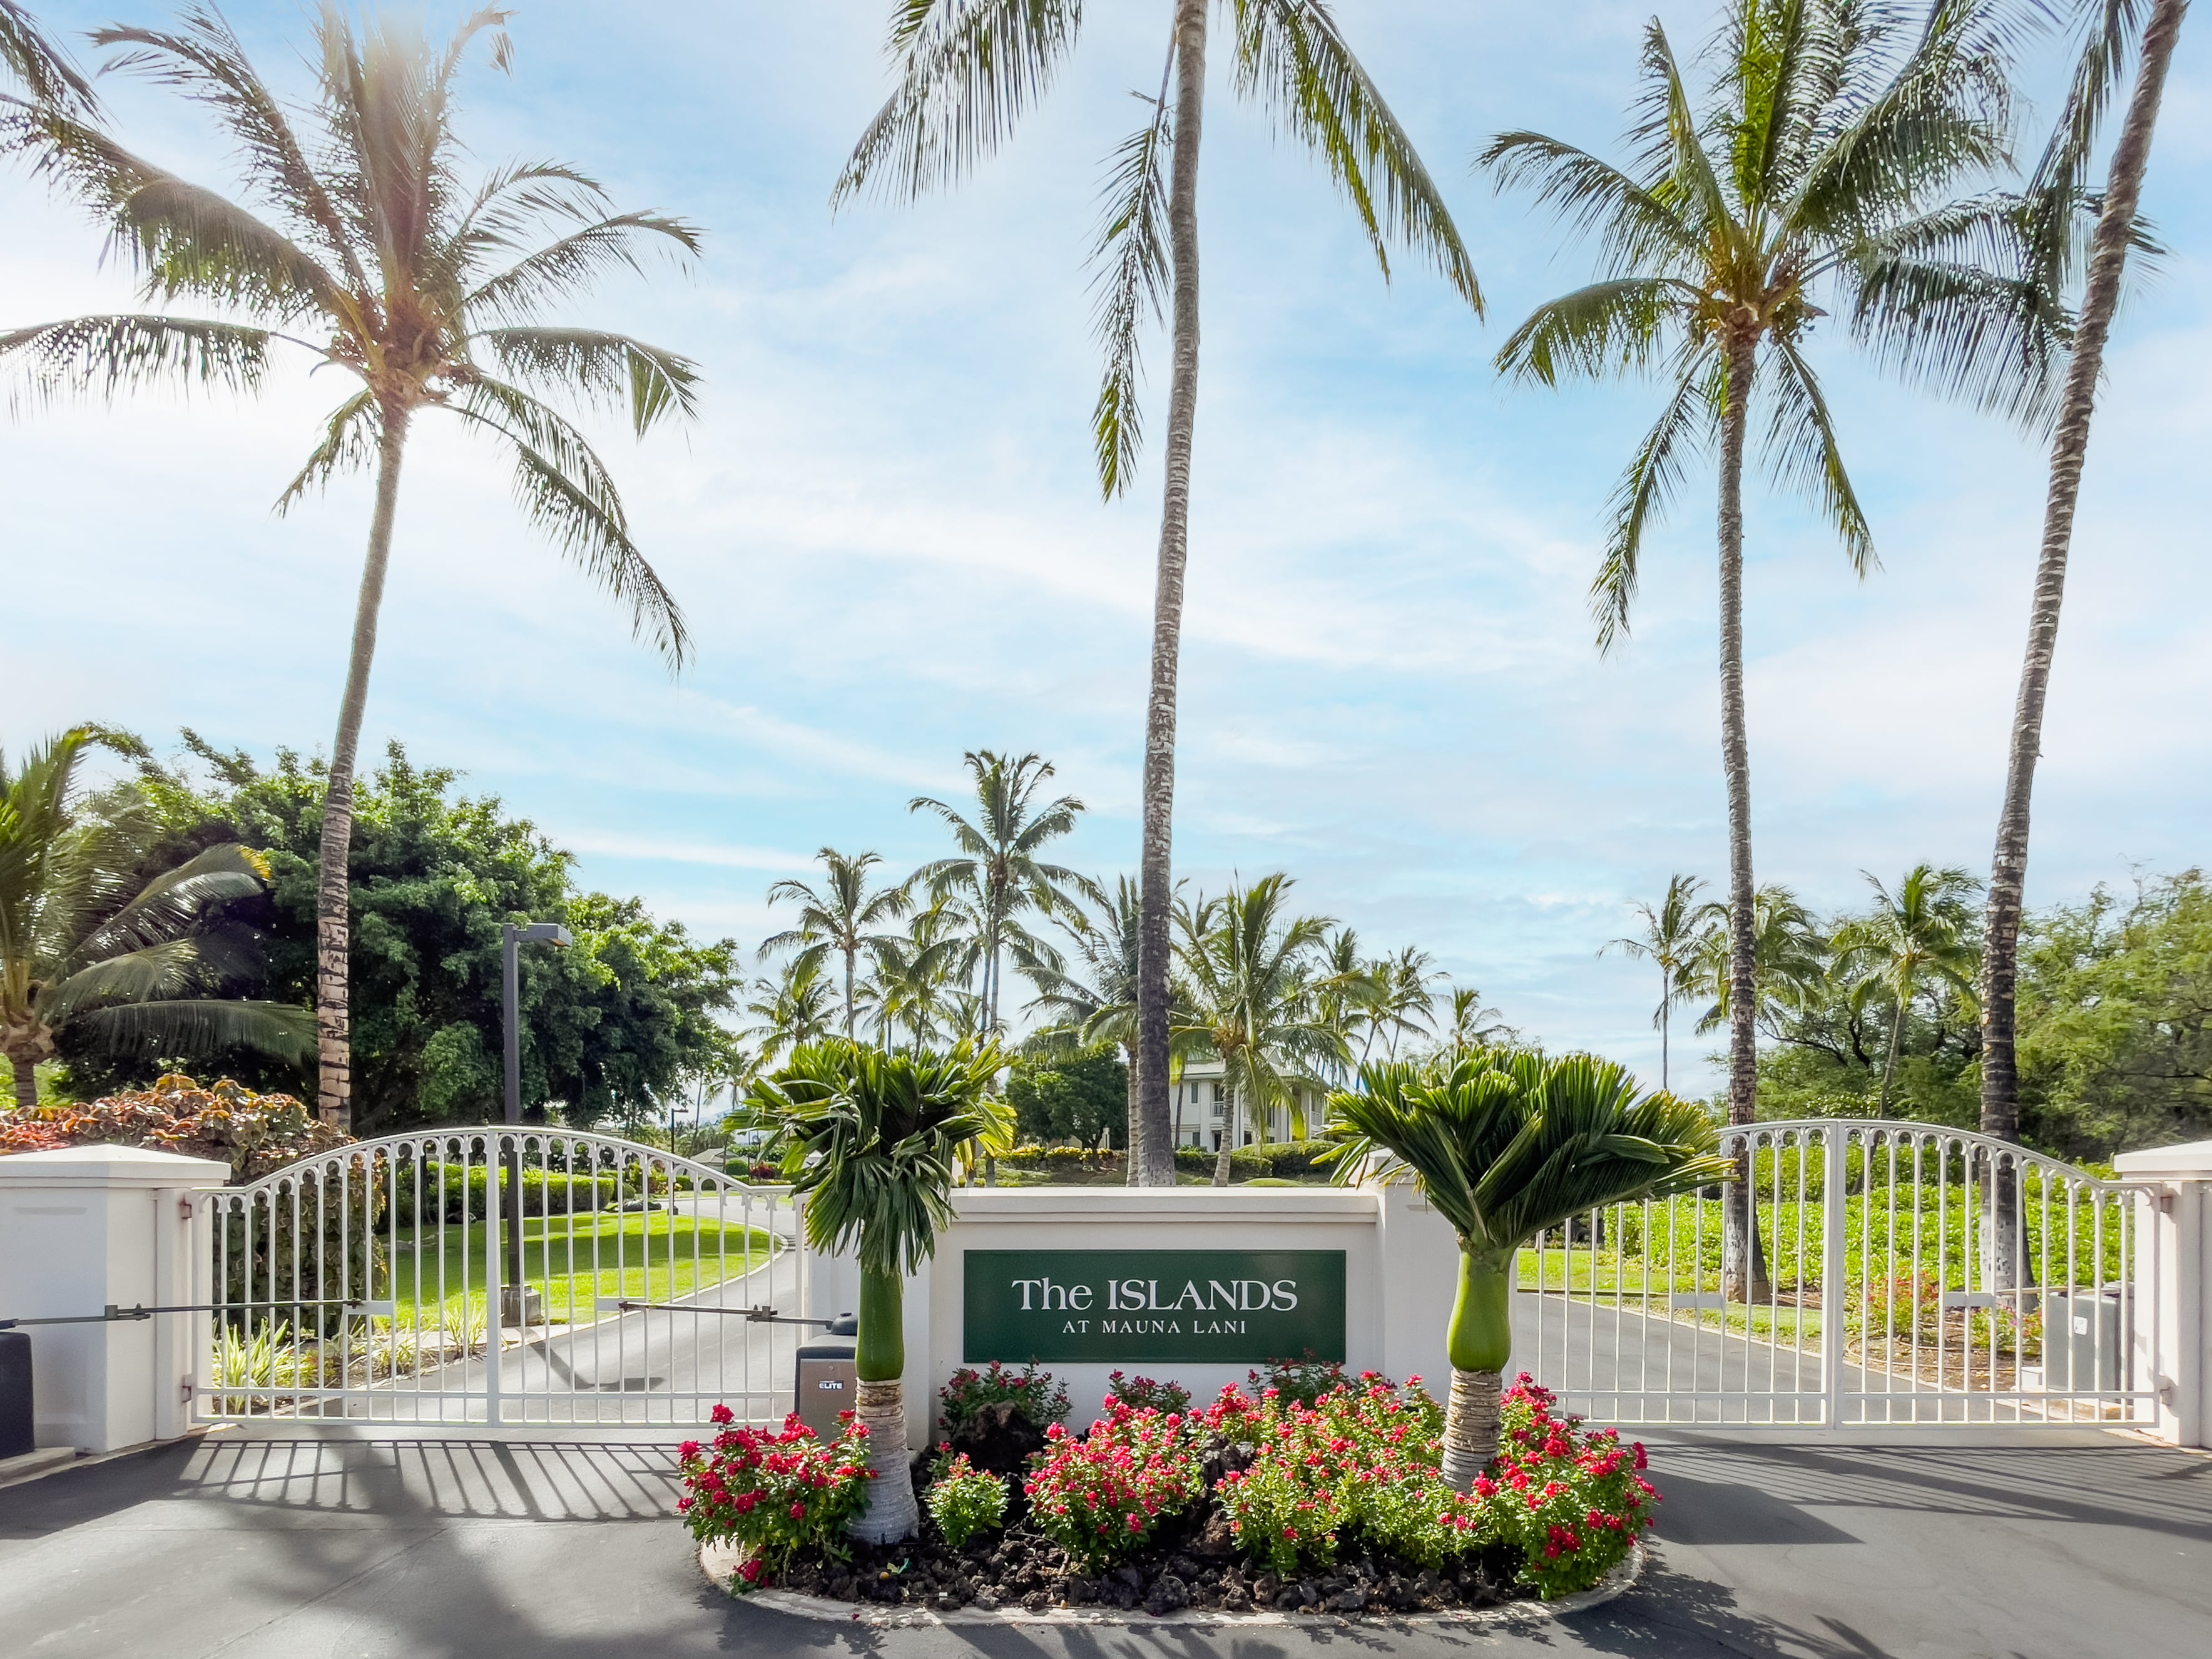 Gated Entrance to The Islands Private Community